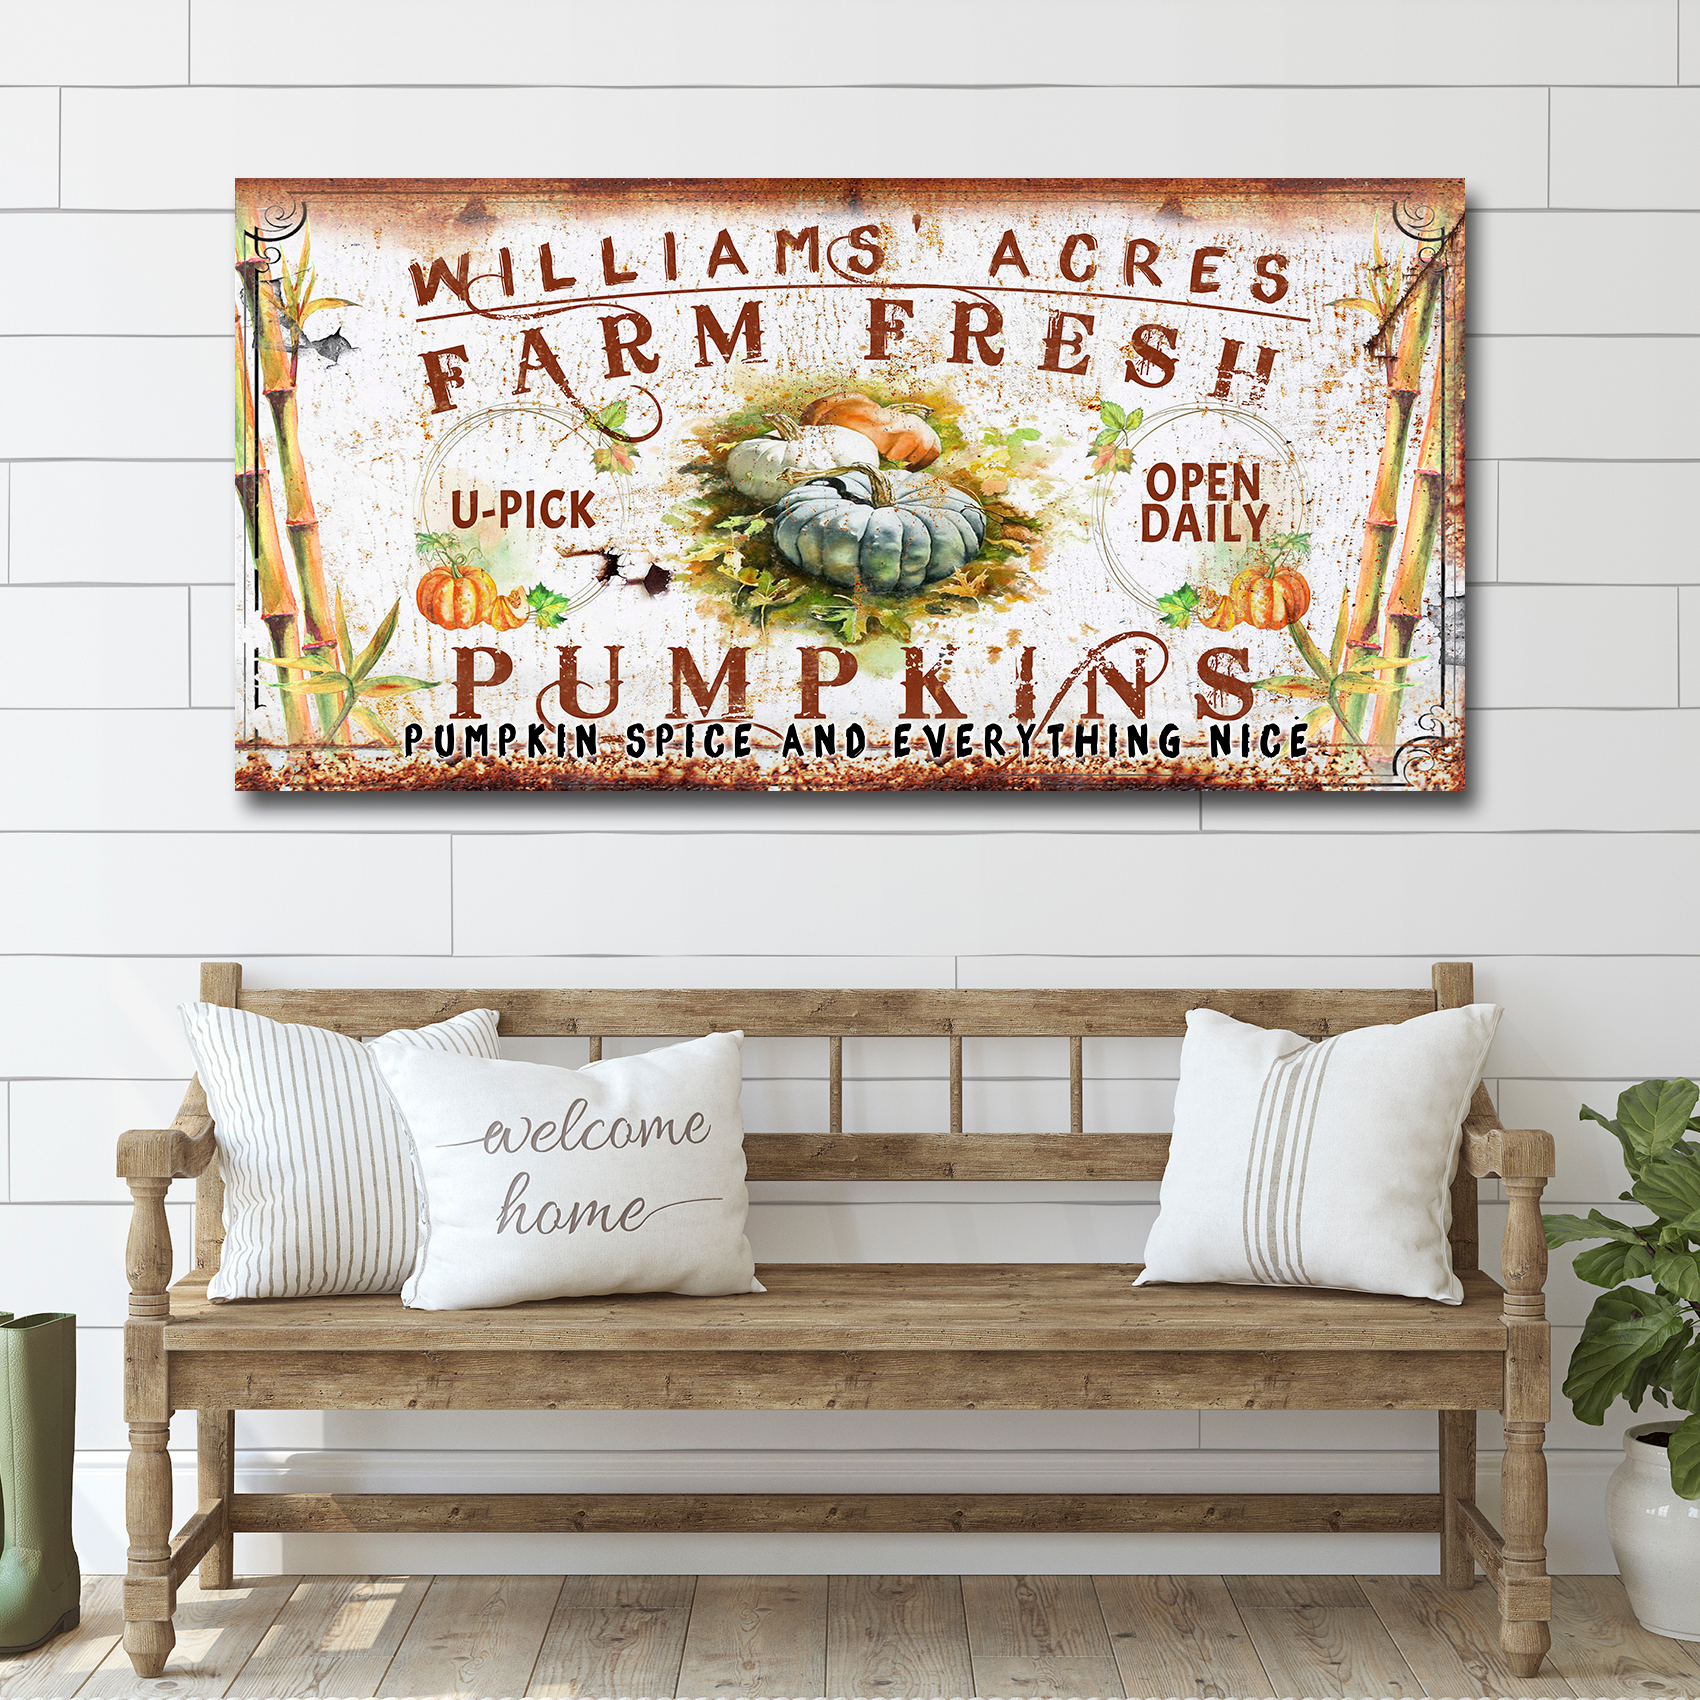 Farm Fresh Pumpkins Style 3 - Image by Tailored Canvases